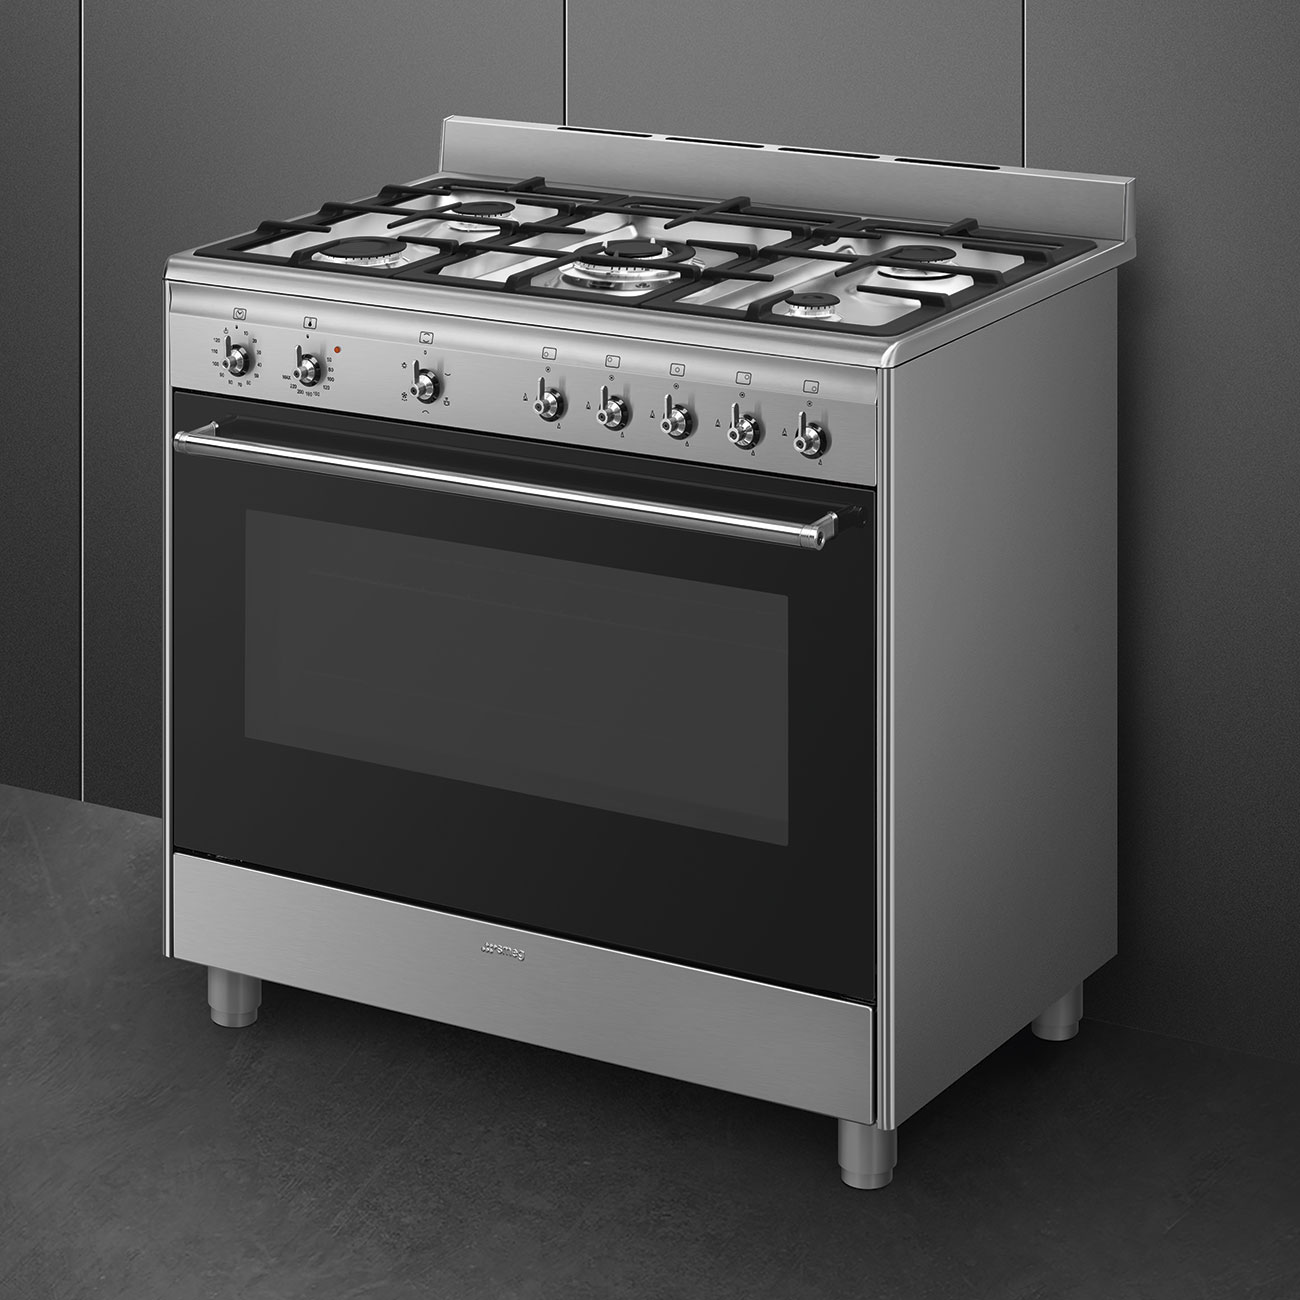 Smeg Stainless steel Cooker with Gas Hob_4